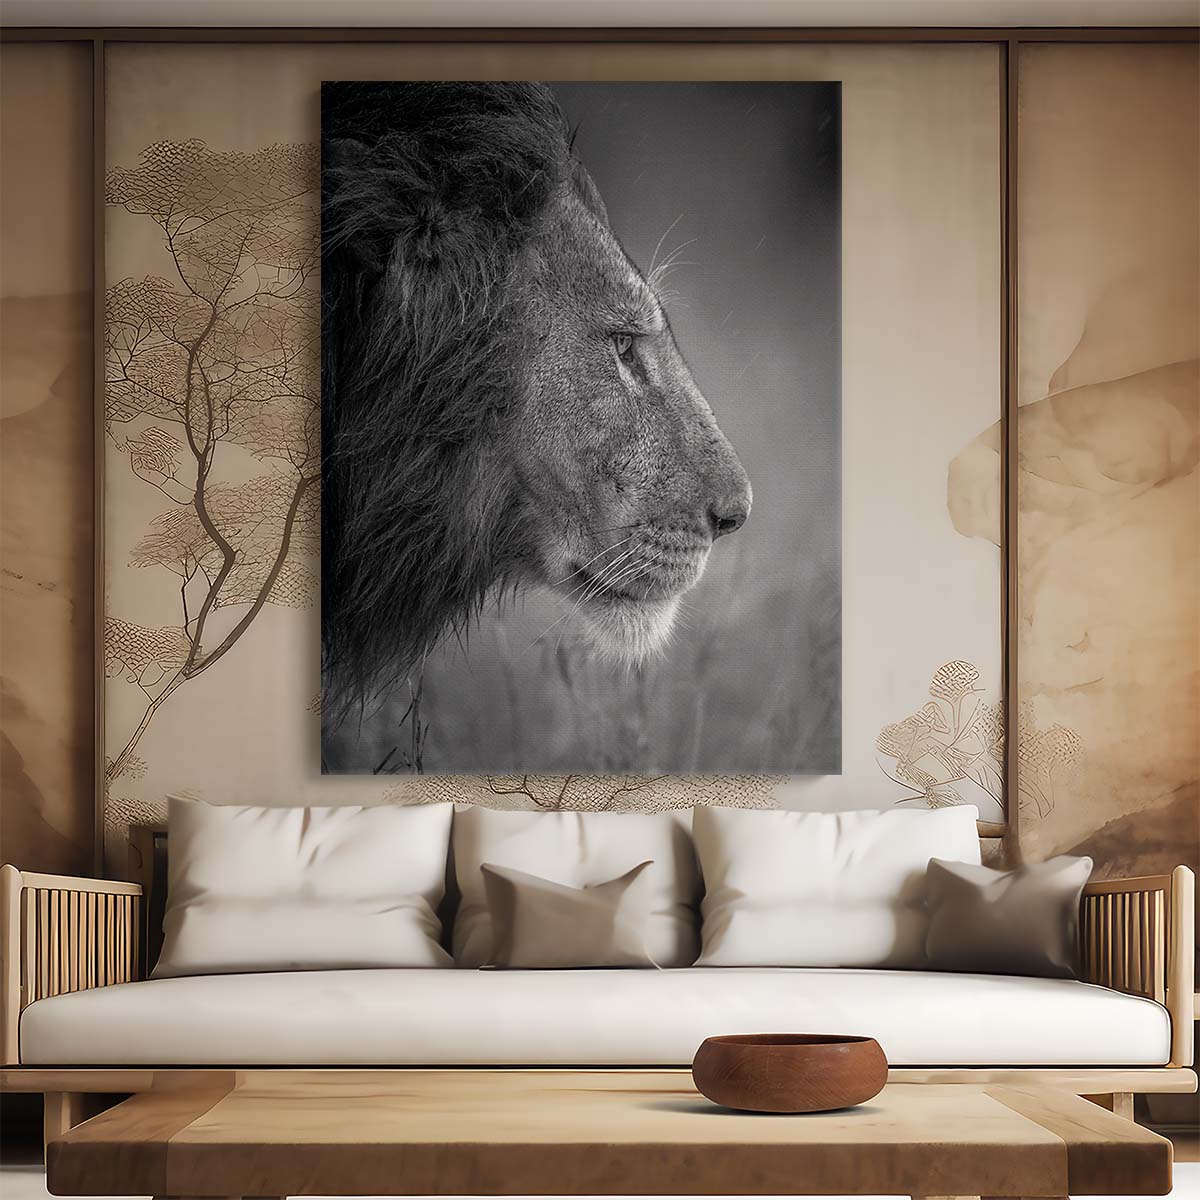 Kenyan Lion Close-Up, Monochrome Wildlife Photography in Rain by Luxuriance Designs, made in USA